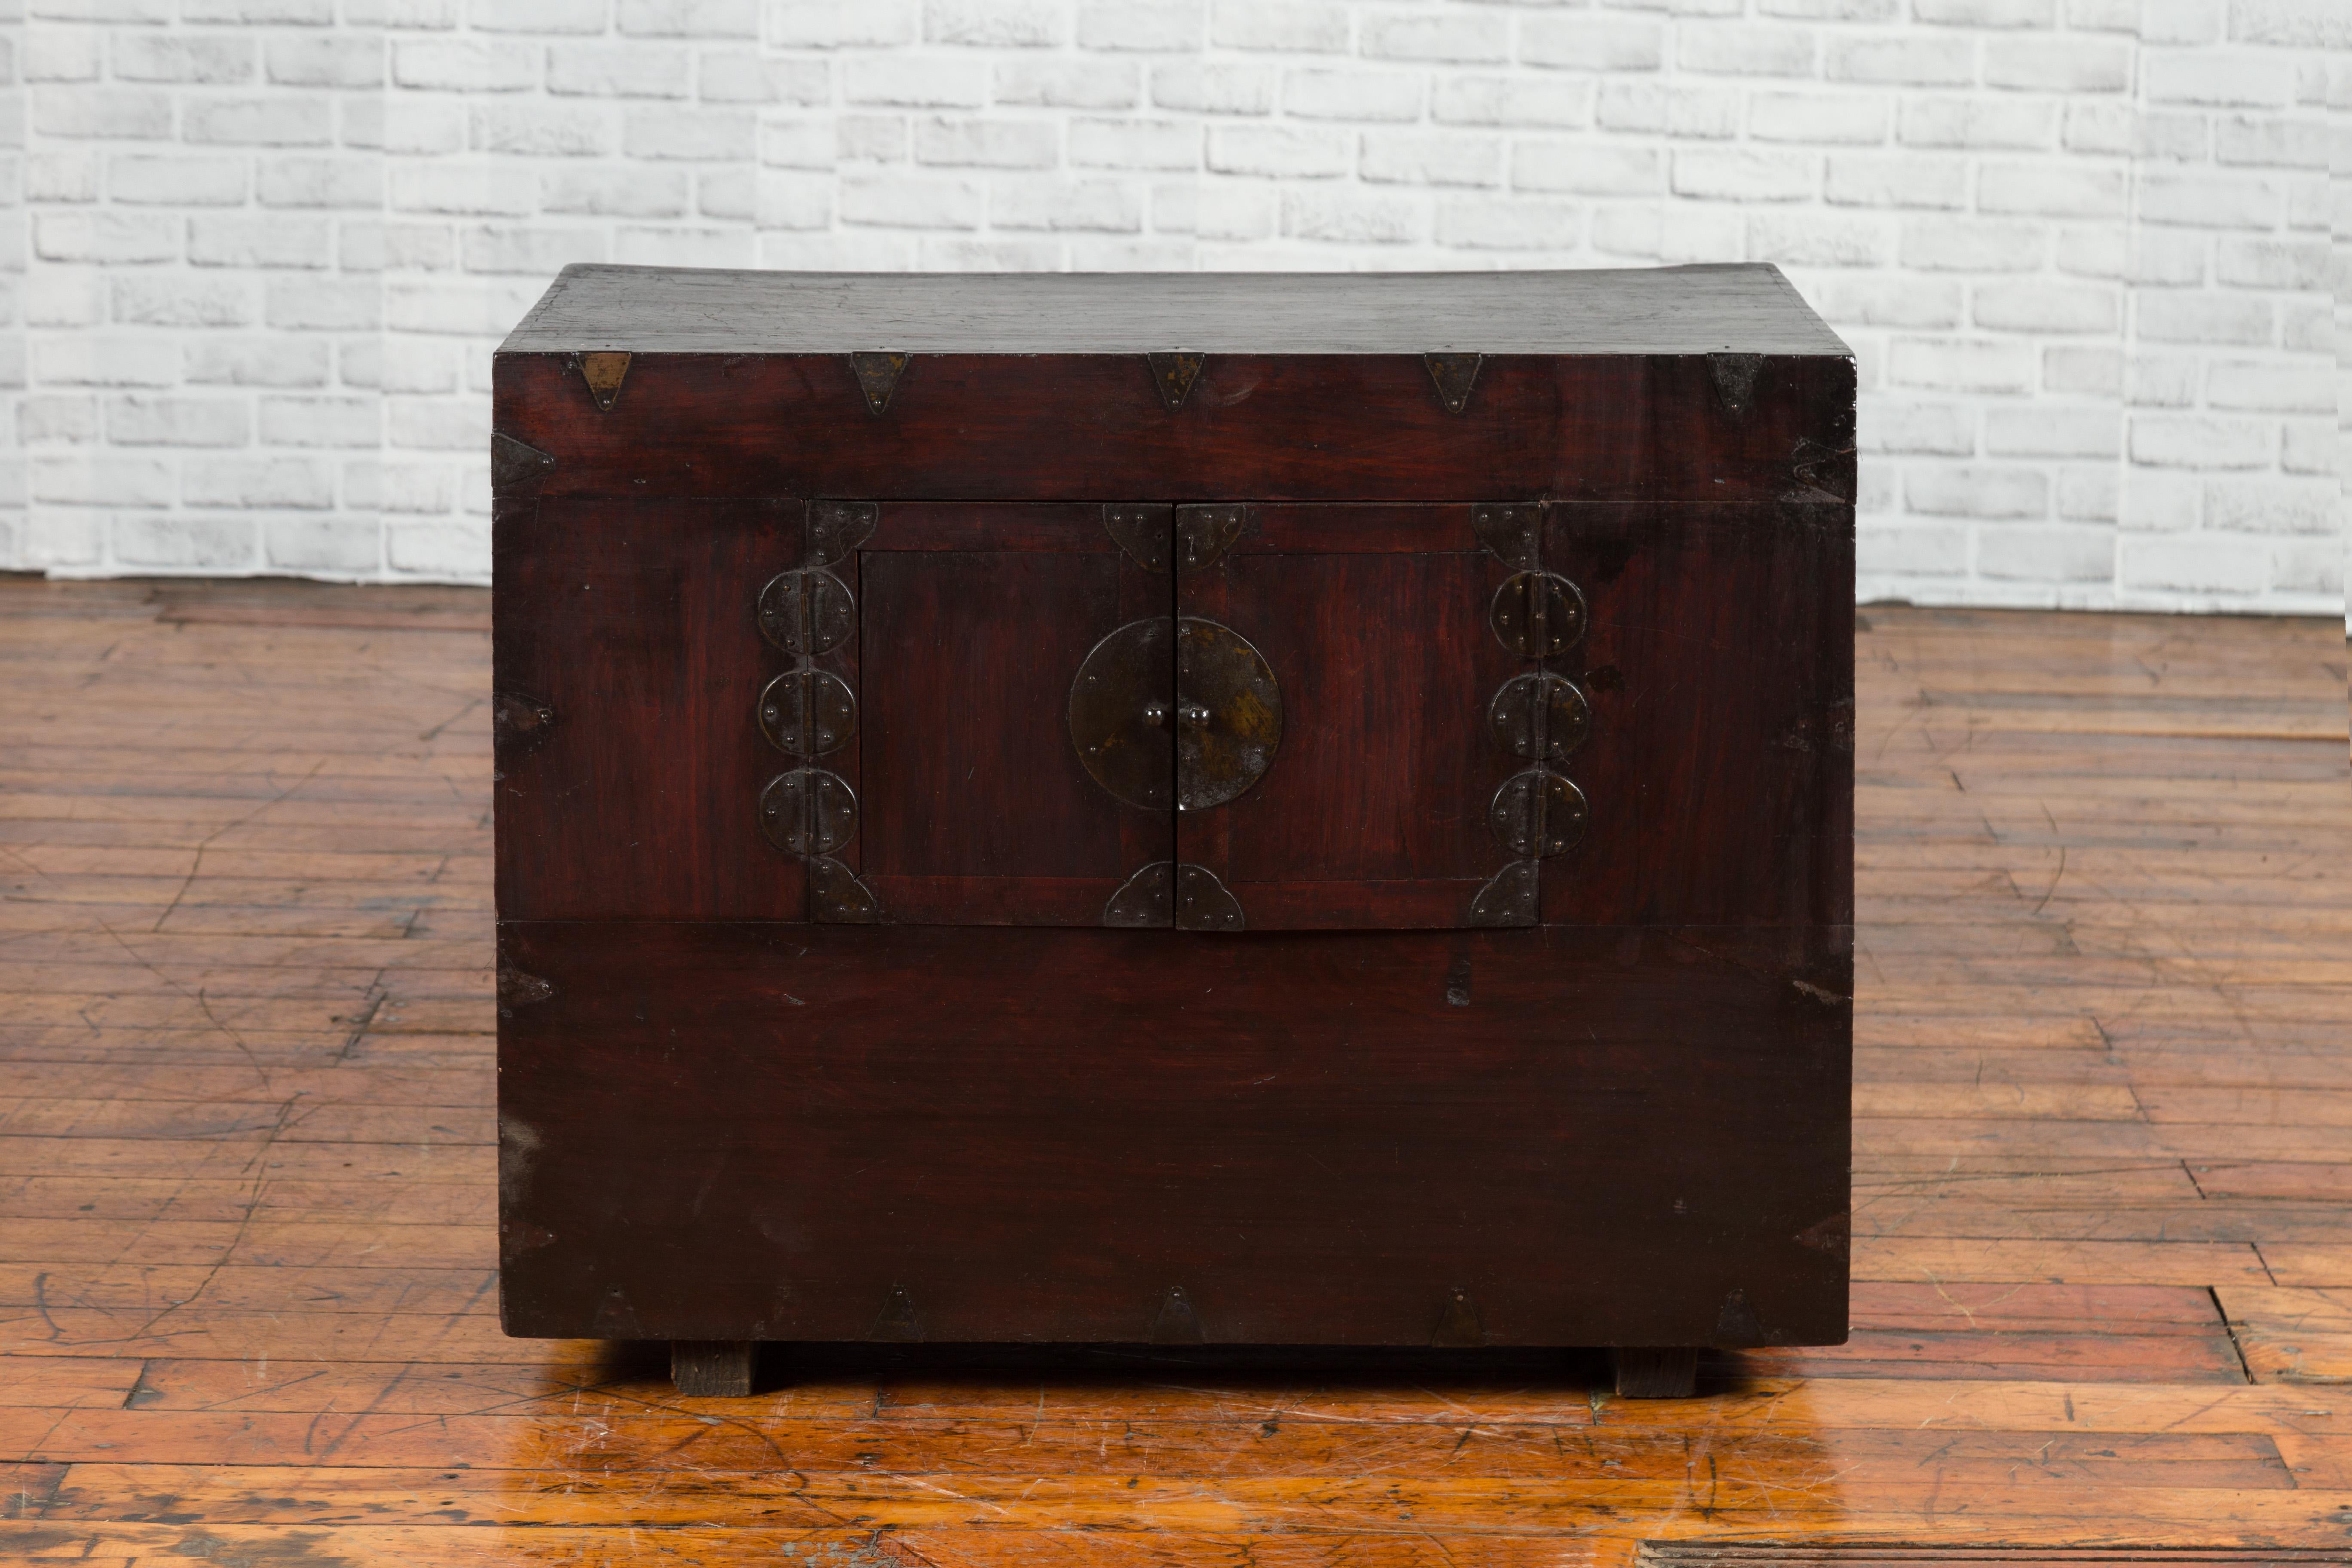 A Korean small cabinet from the 19th century, with brass hardware and brown lacquer. Created in Korea during the 19th century, this brown lacquered small cabinet features a linear shape perfectly accented with dark patinated brass hardware. Two